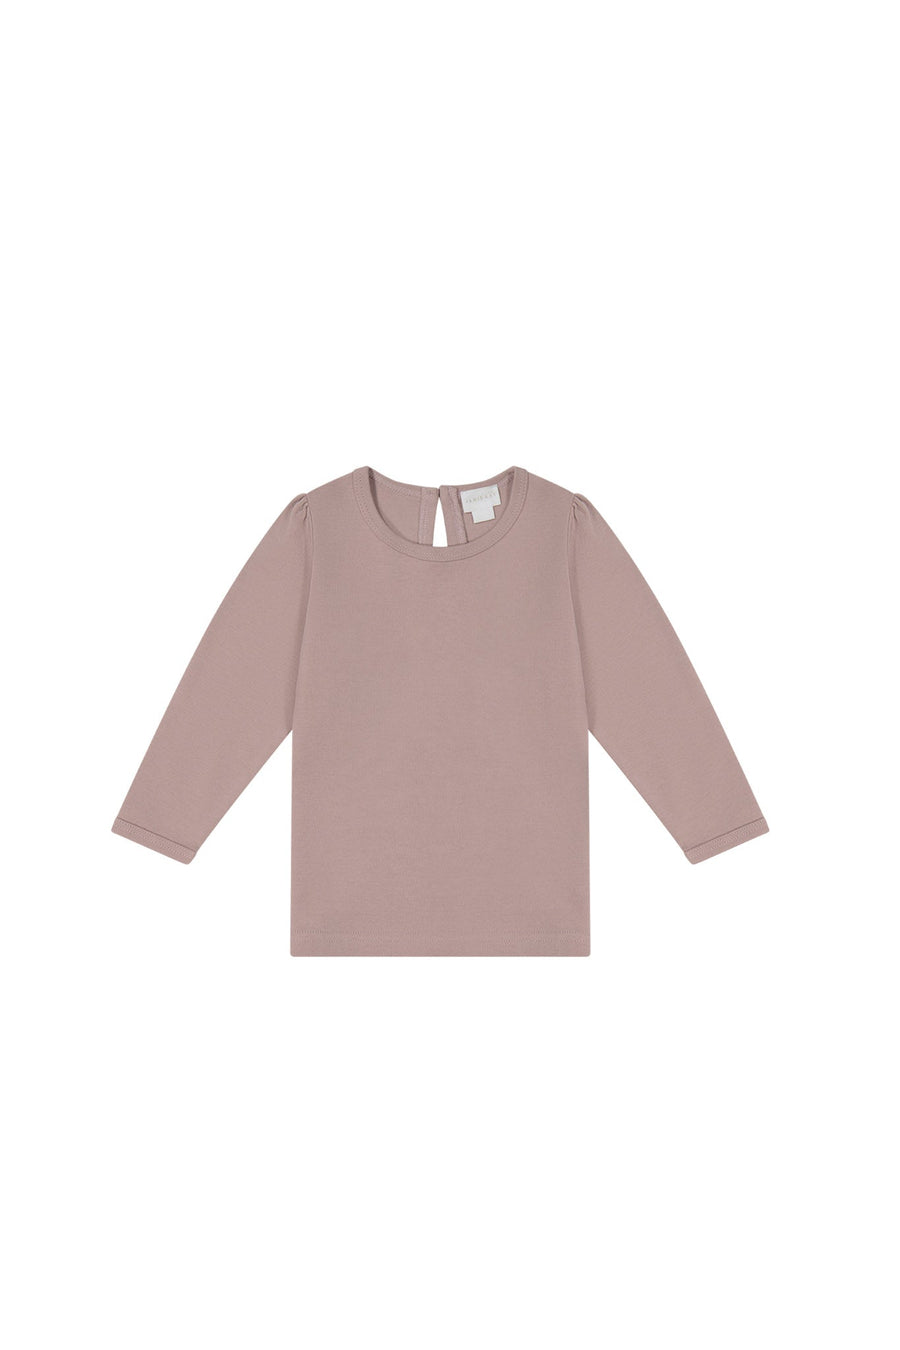 Pima Cotton Cindy Top - Softest Mauve Childrens Top from Jamie Kay USA